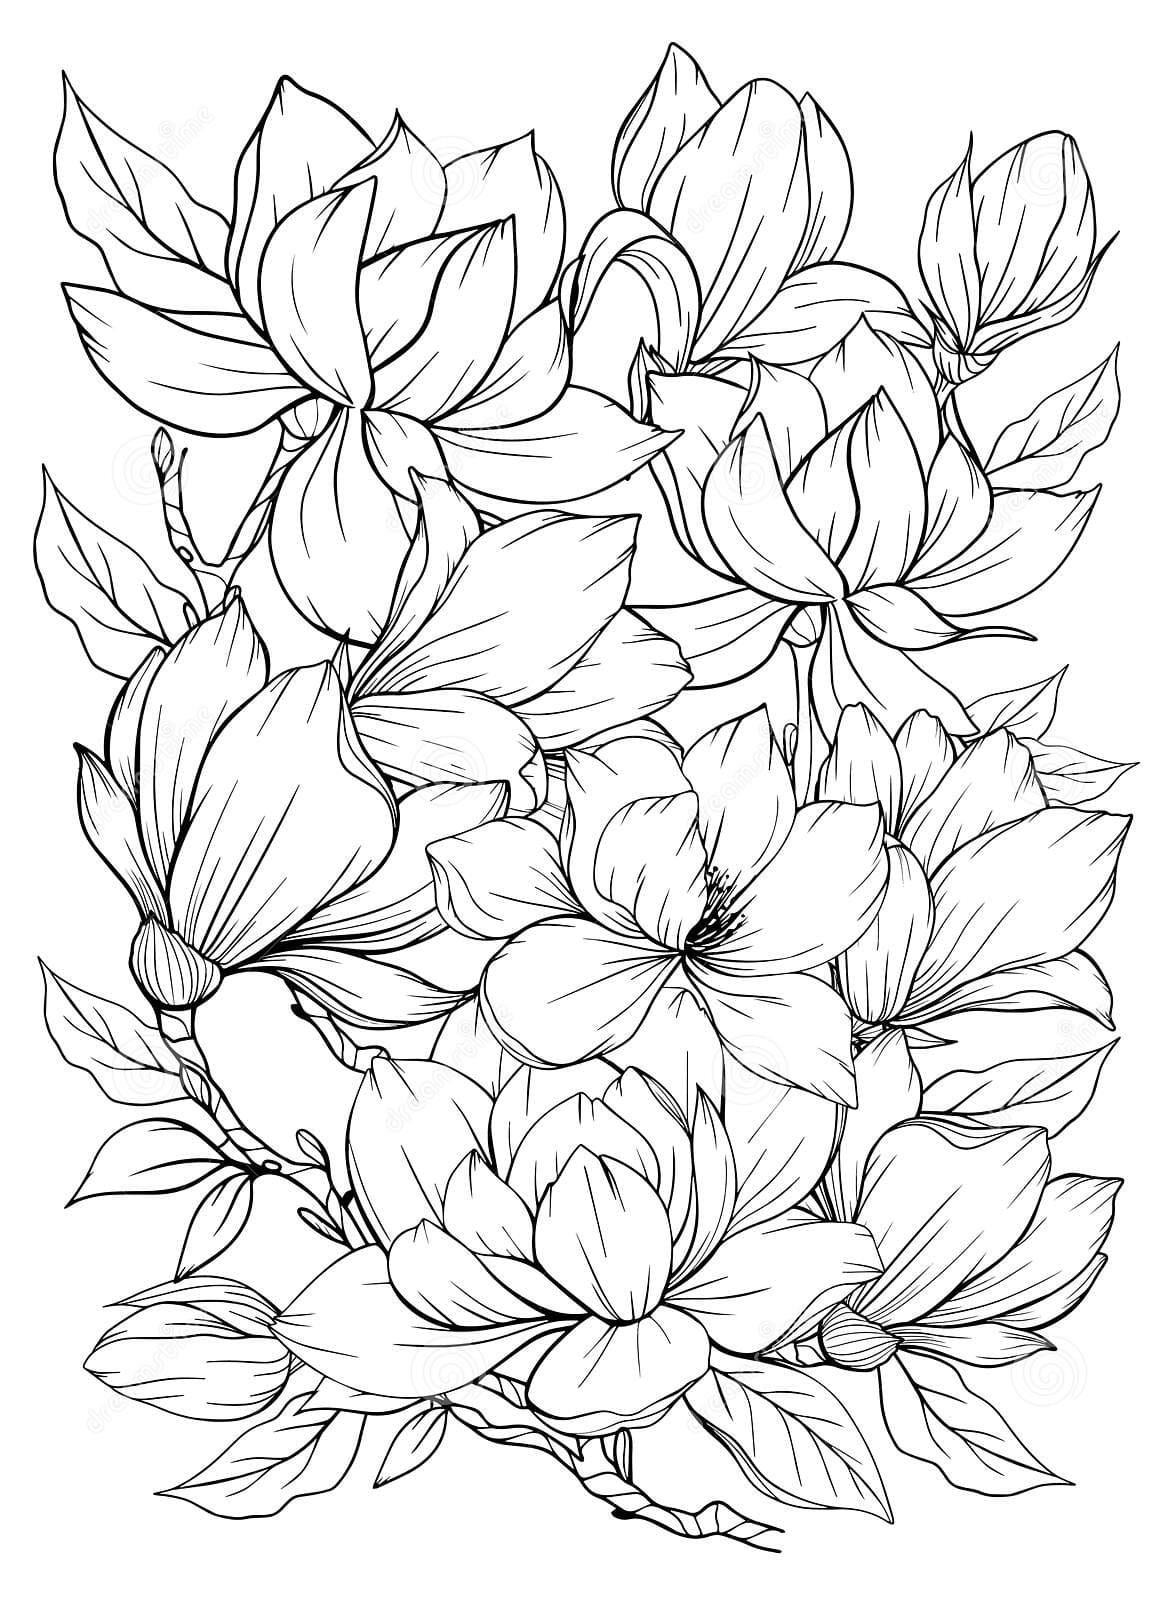 Coloring Page With Magnolia And Leaves